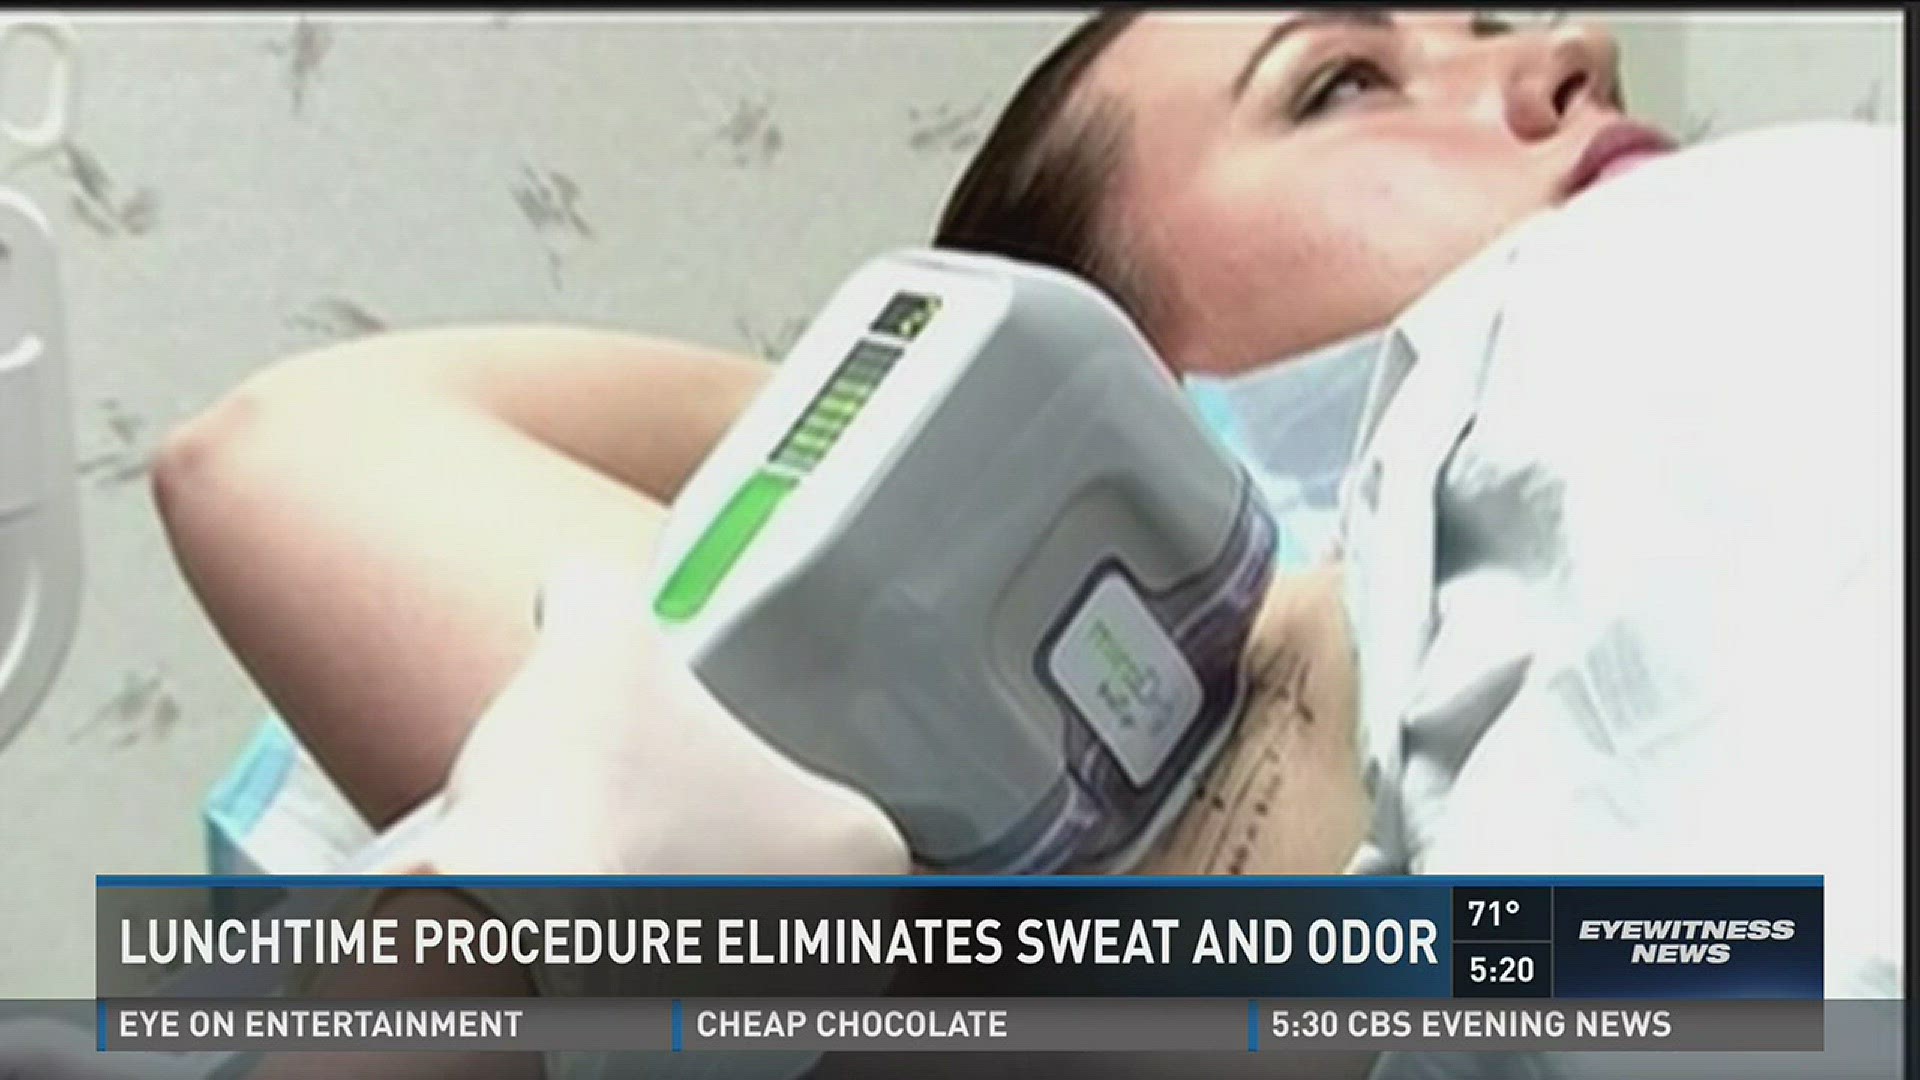 Lunchtime procedure eliminates sweat and odor